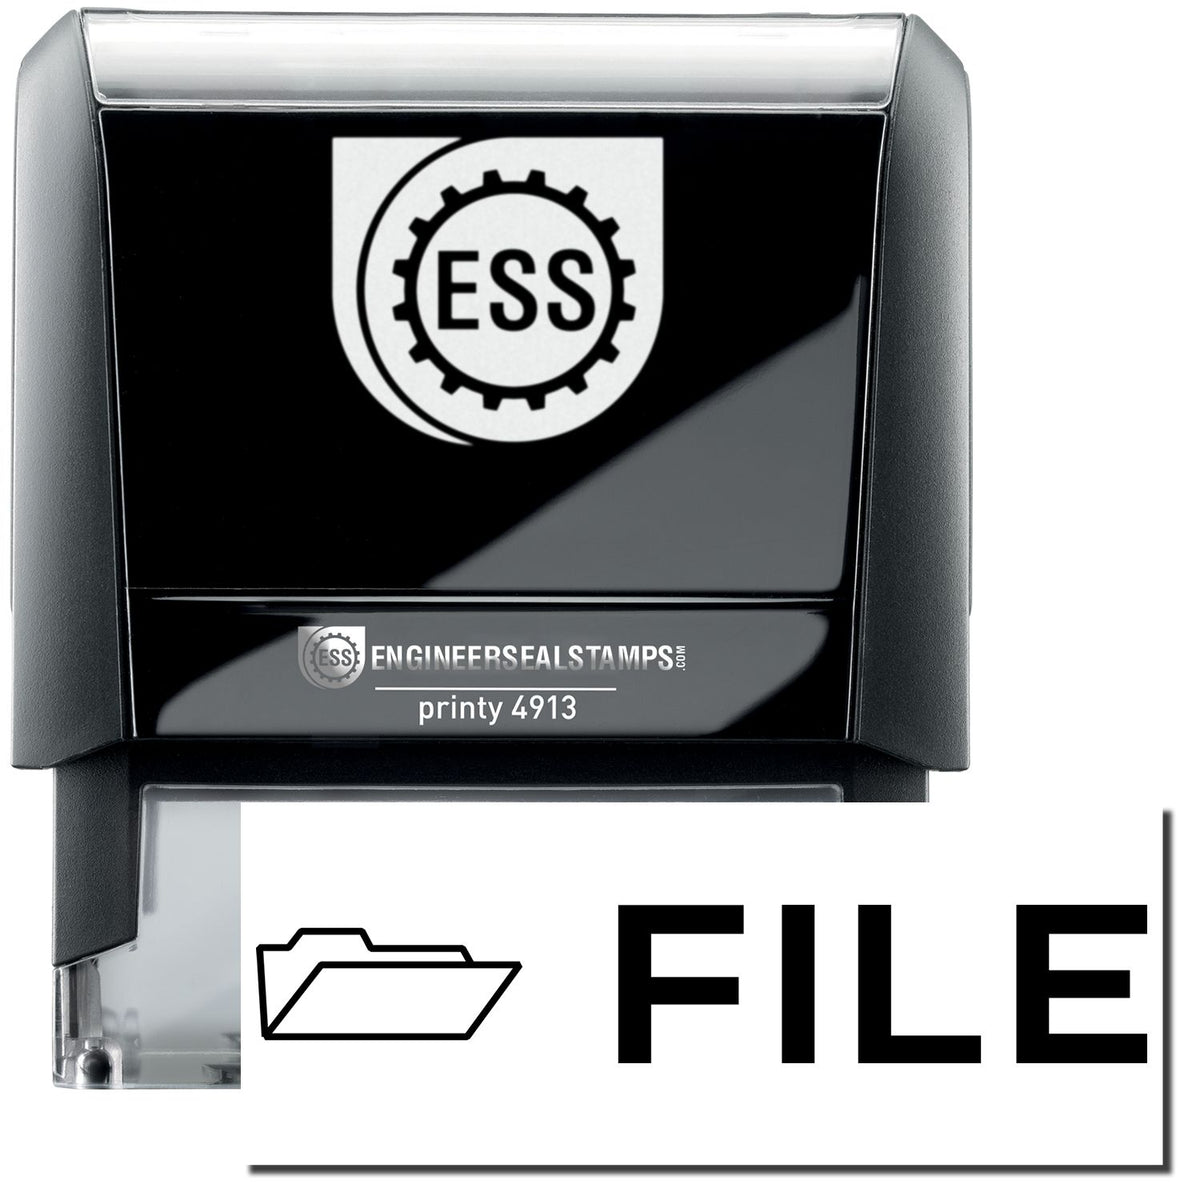 A self-inking stamp with a stamped image showing how the text &quot;FILE&quot; in a large bold font and a small icon of a file folder on the left side is displayed after stamping.